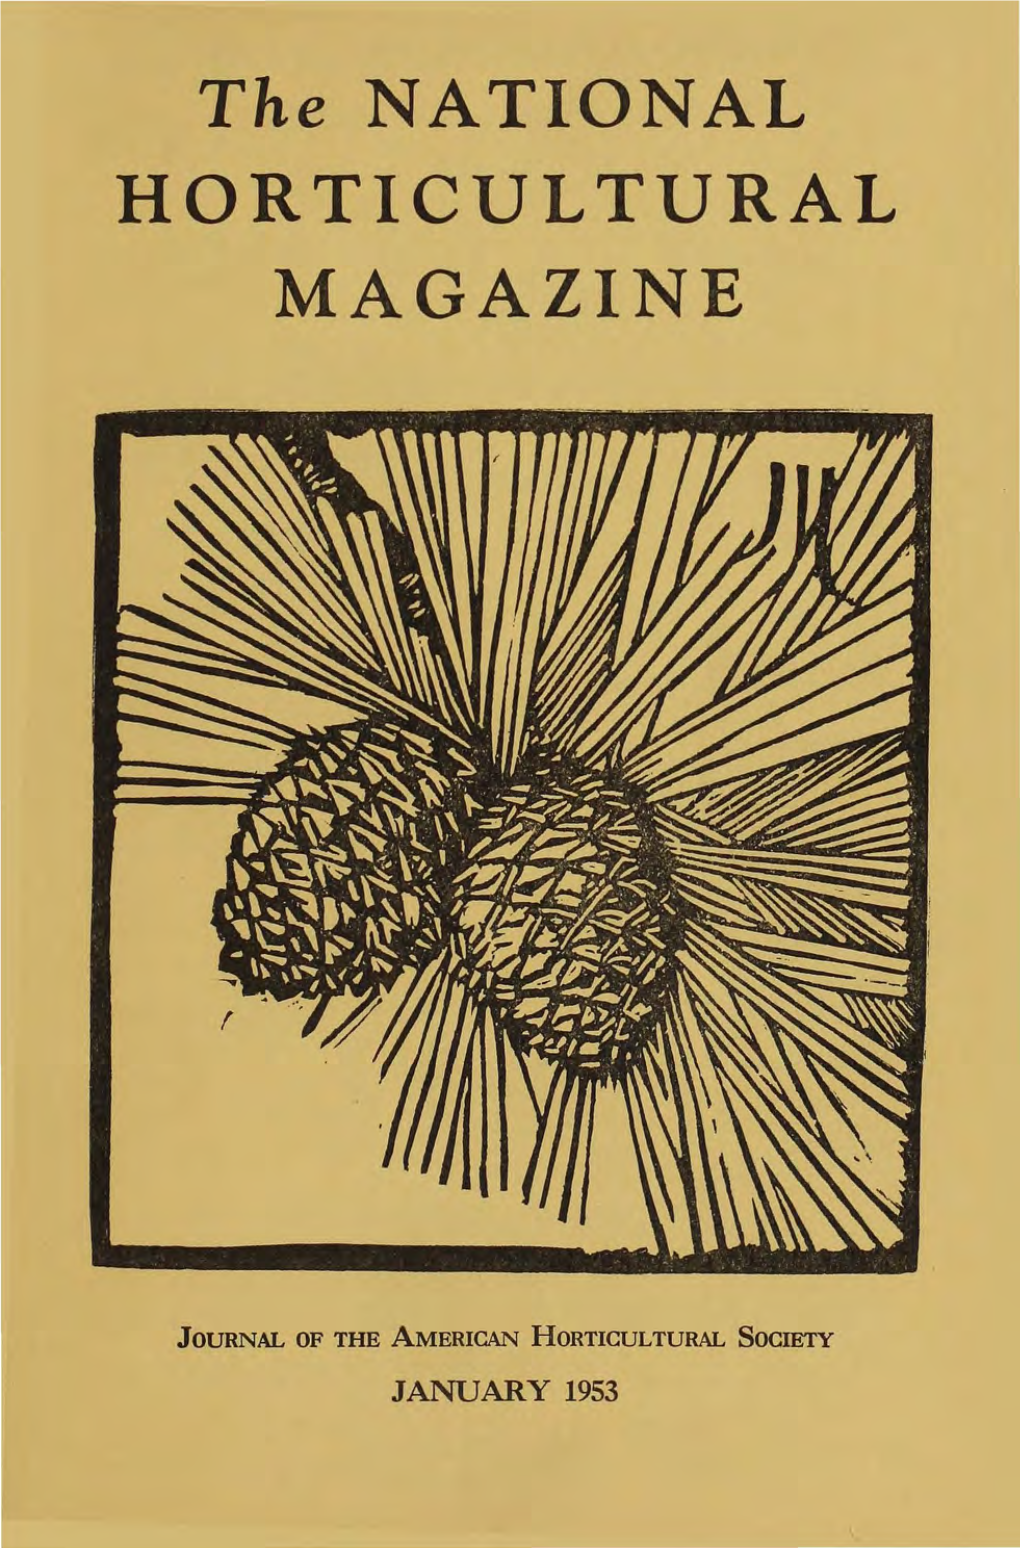 JANUARY 1953 the American Horticultural Society, Inc